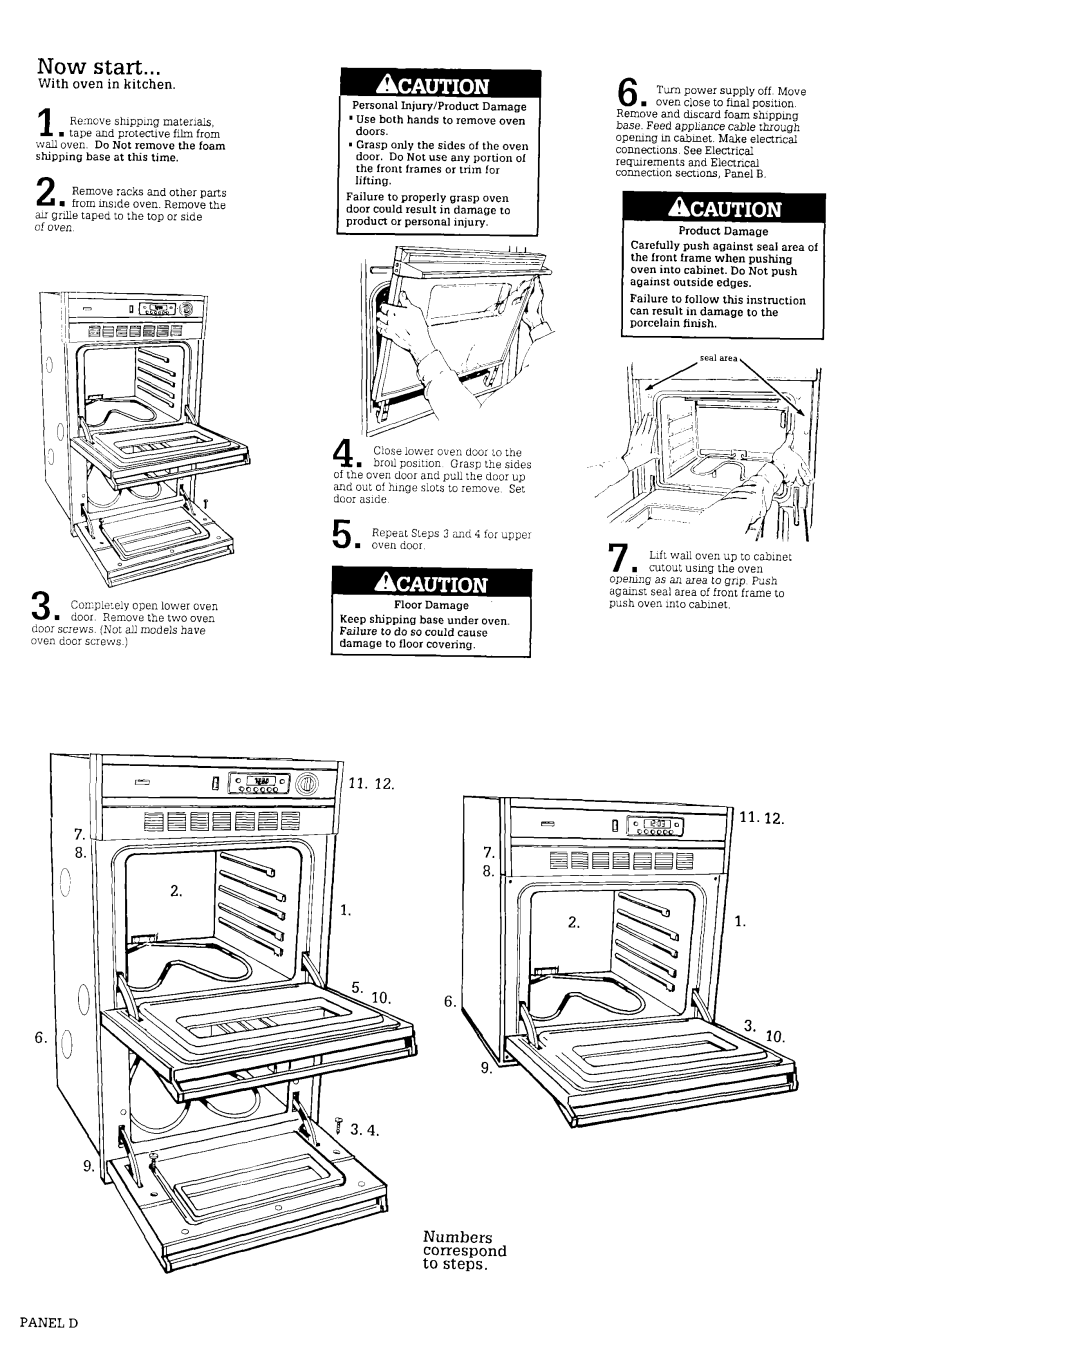 Roper Double Oven manual Now start, With oven in kitchen, Numbers correspond to steps, Panel D 